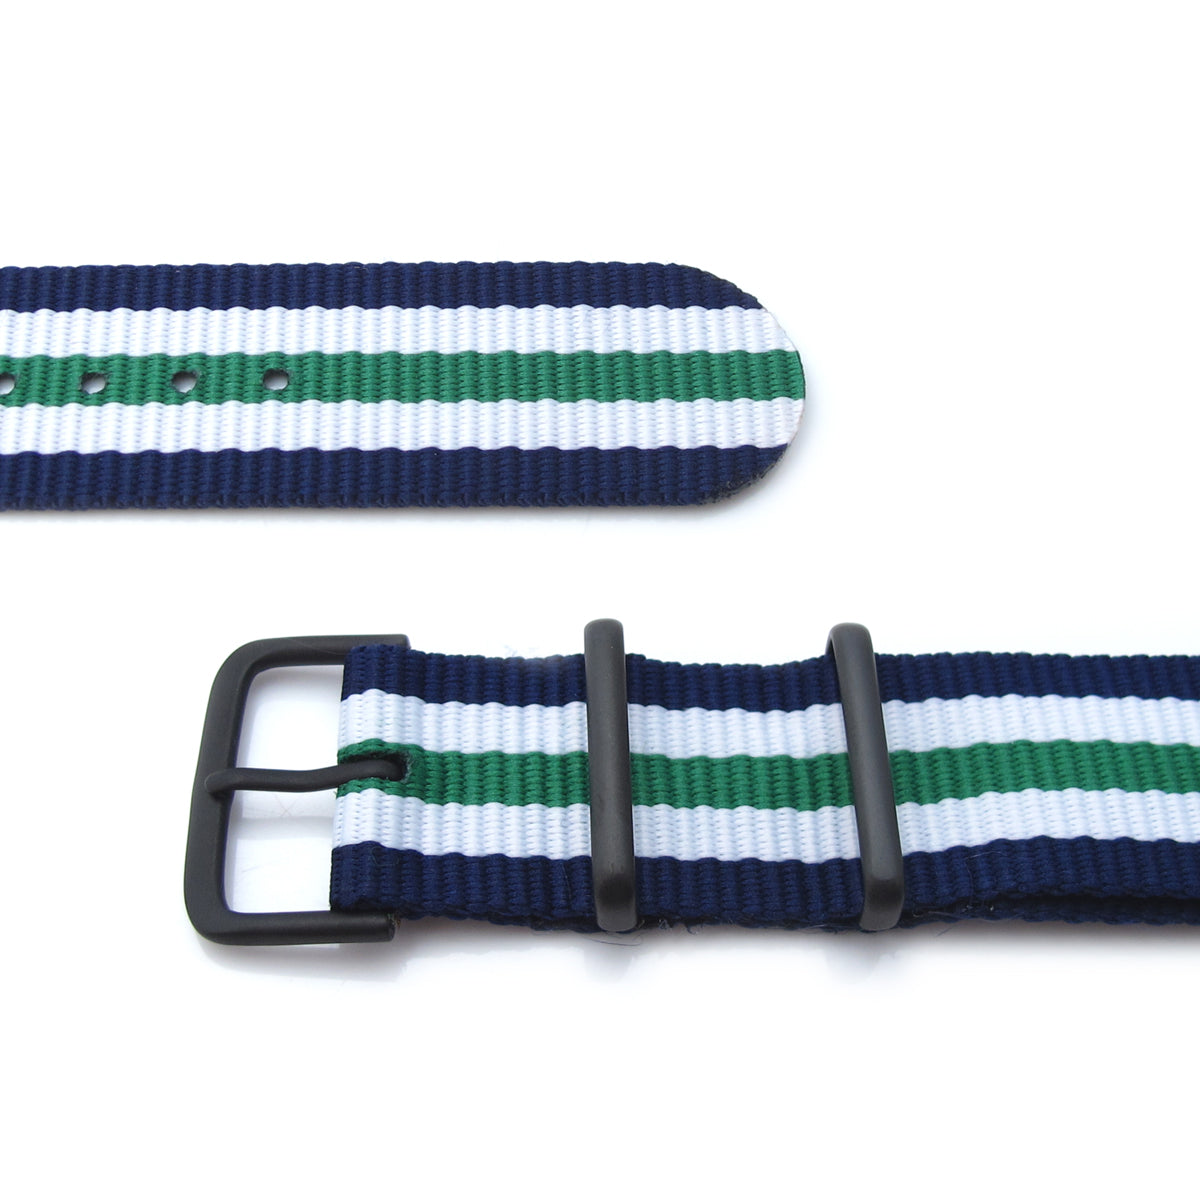 MiLTAT 20mm G10 military watch strap ballistic nylon armband PVD Blue White & Green Strapcode Watch Bands